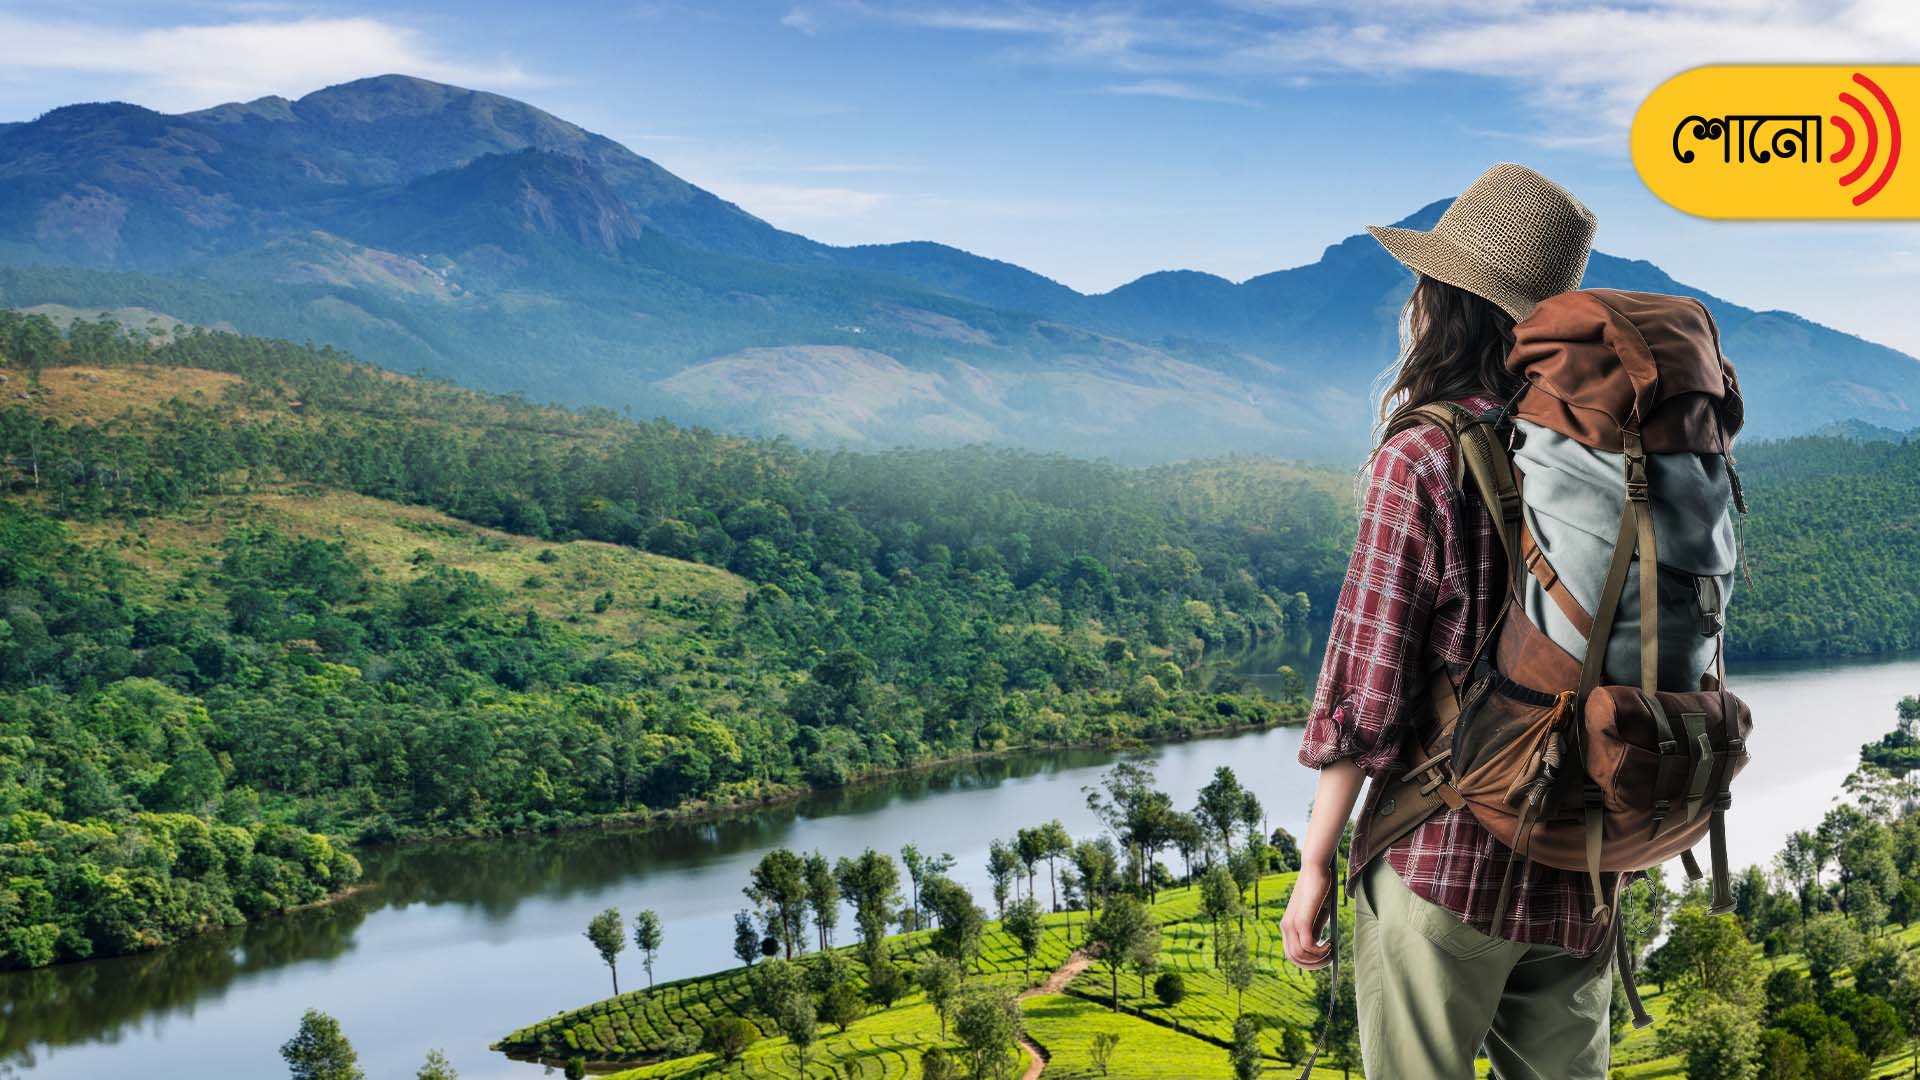 Kerala Tourism to launch app for solo women travellers